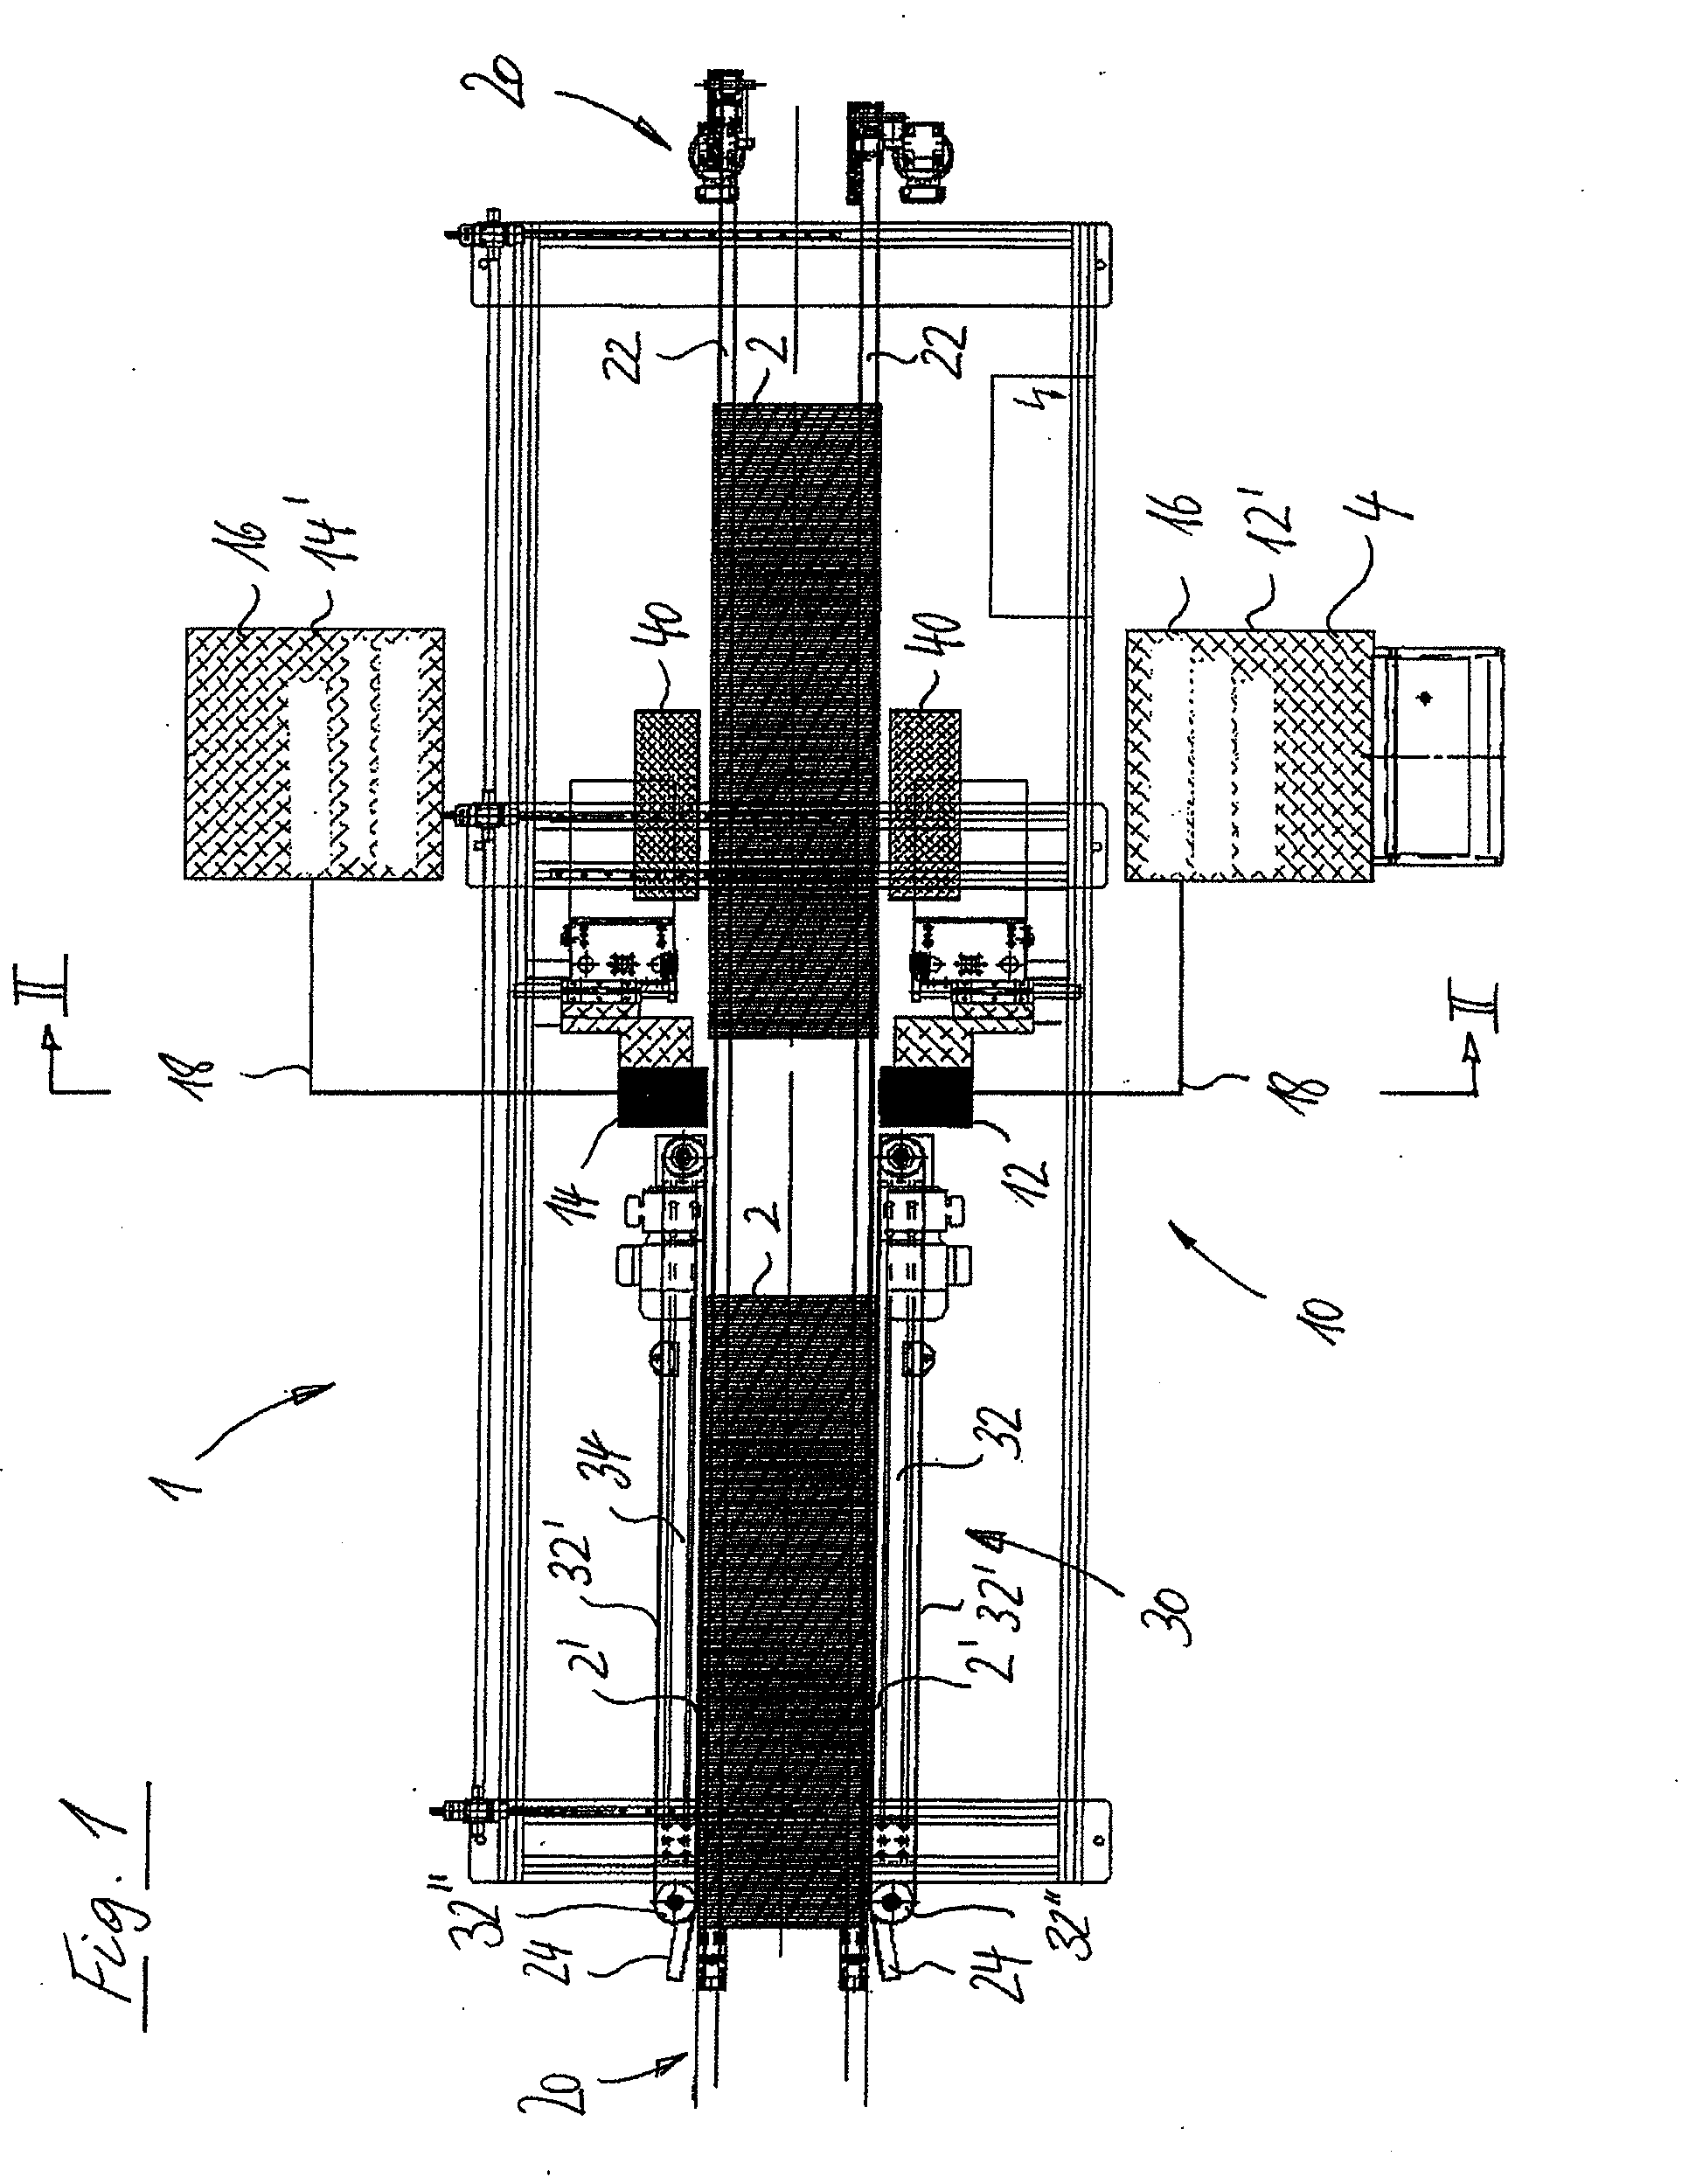 Device and Method for Imprinting a Three-Dimensional Article